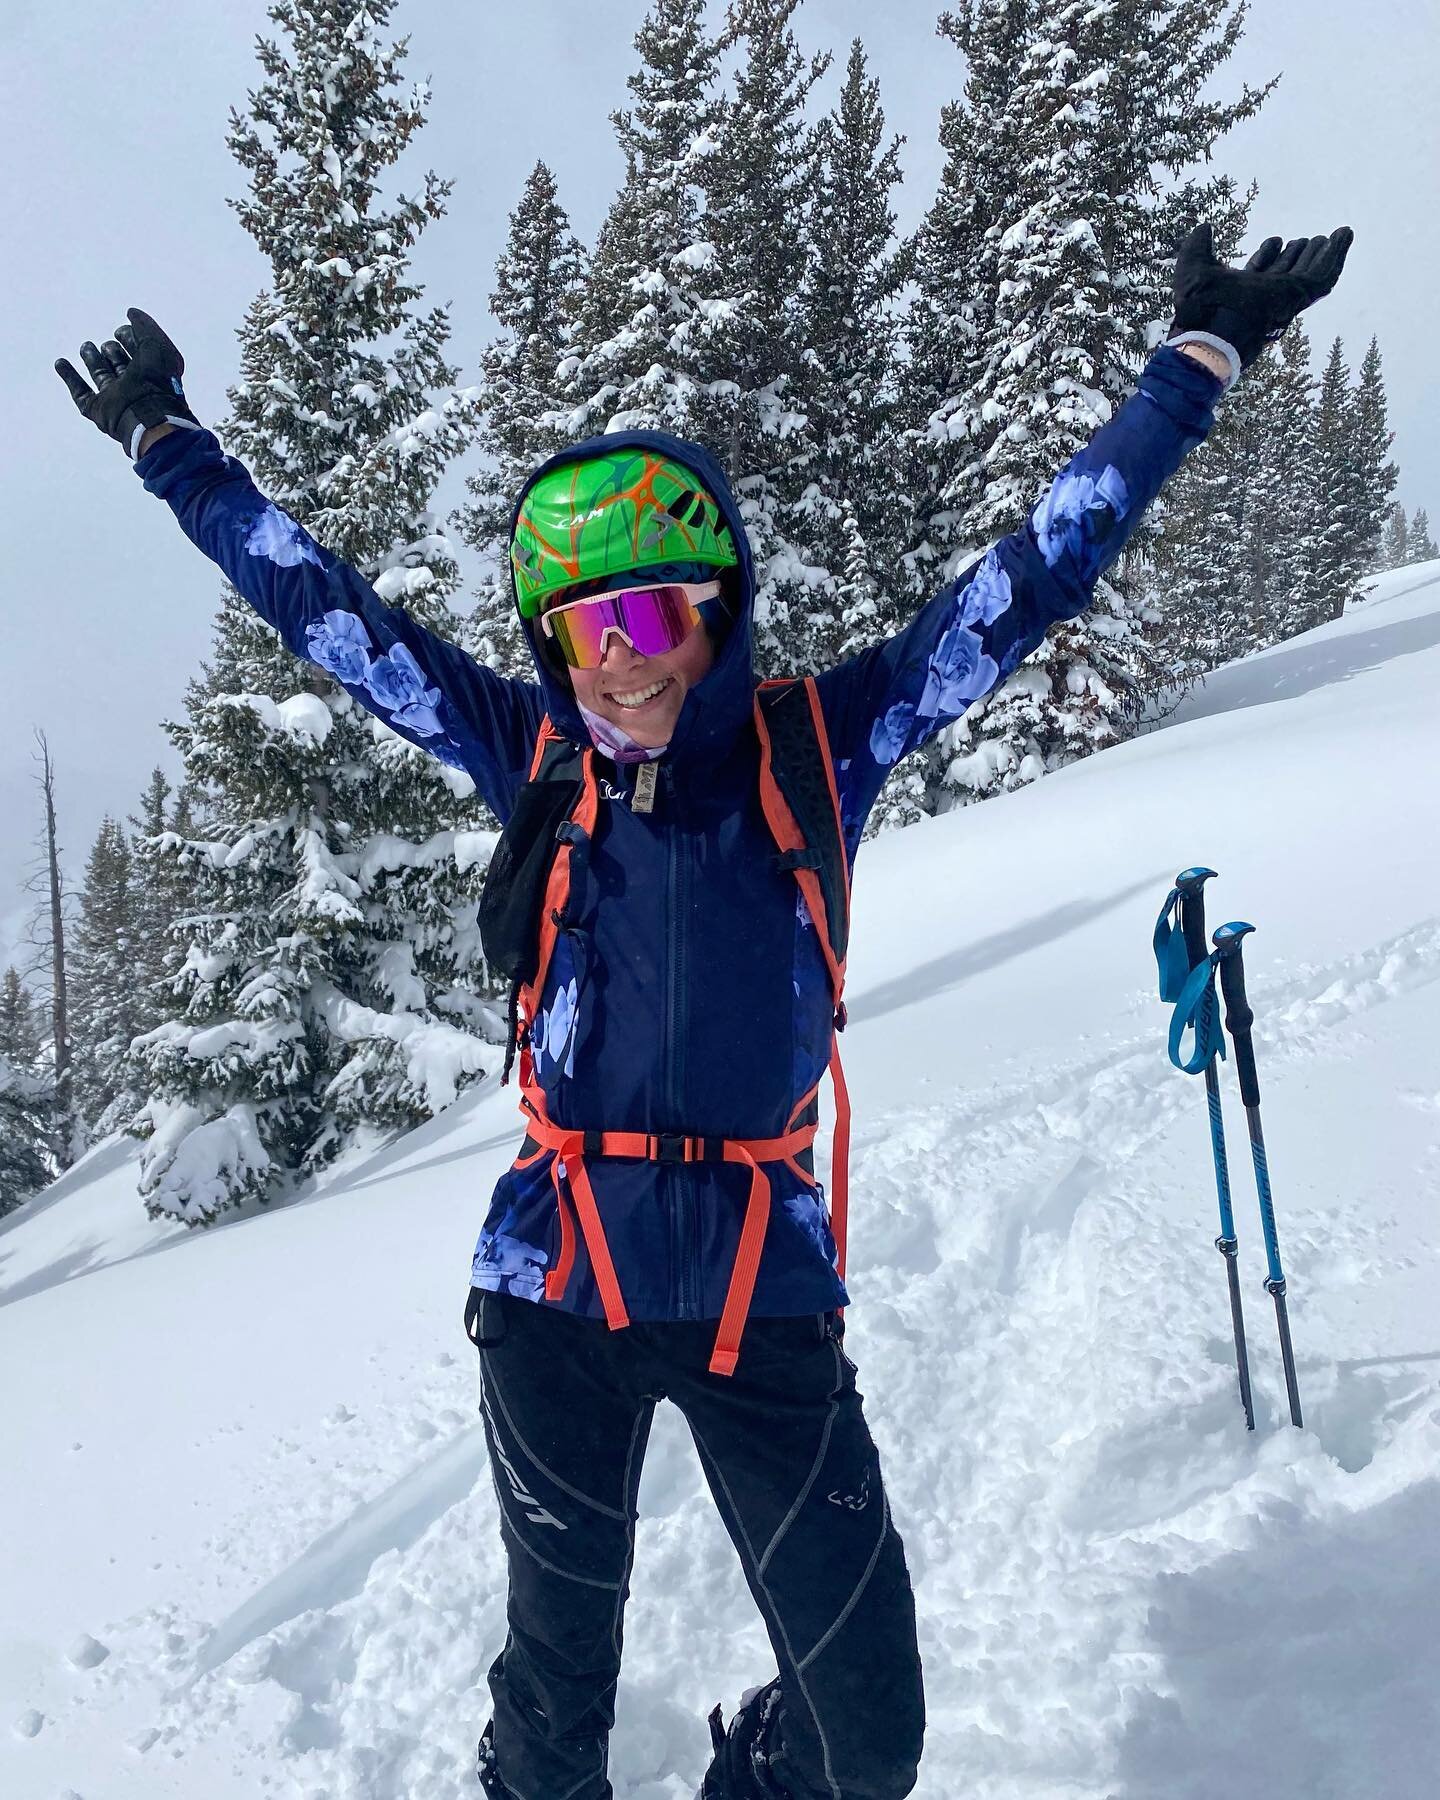 Introducing our newest Indura partner Bria Rickert! She grew up in Gunnison, Colorado as a competitive runner and cross-country skier. Bria is finishing up her junior year at Western Colorado University where she is studying education. In 2022 she sw